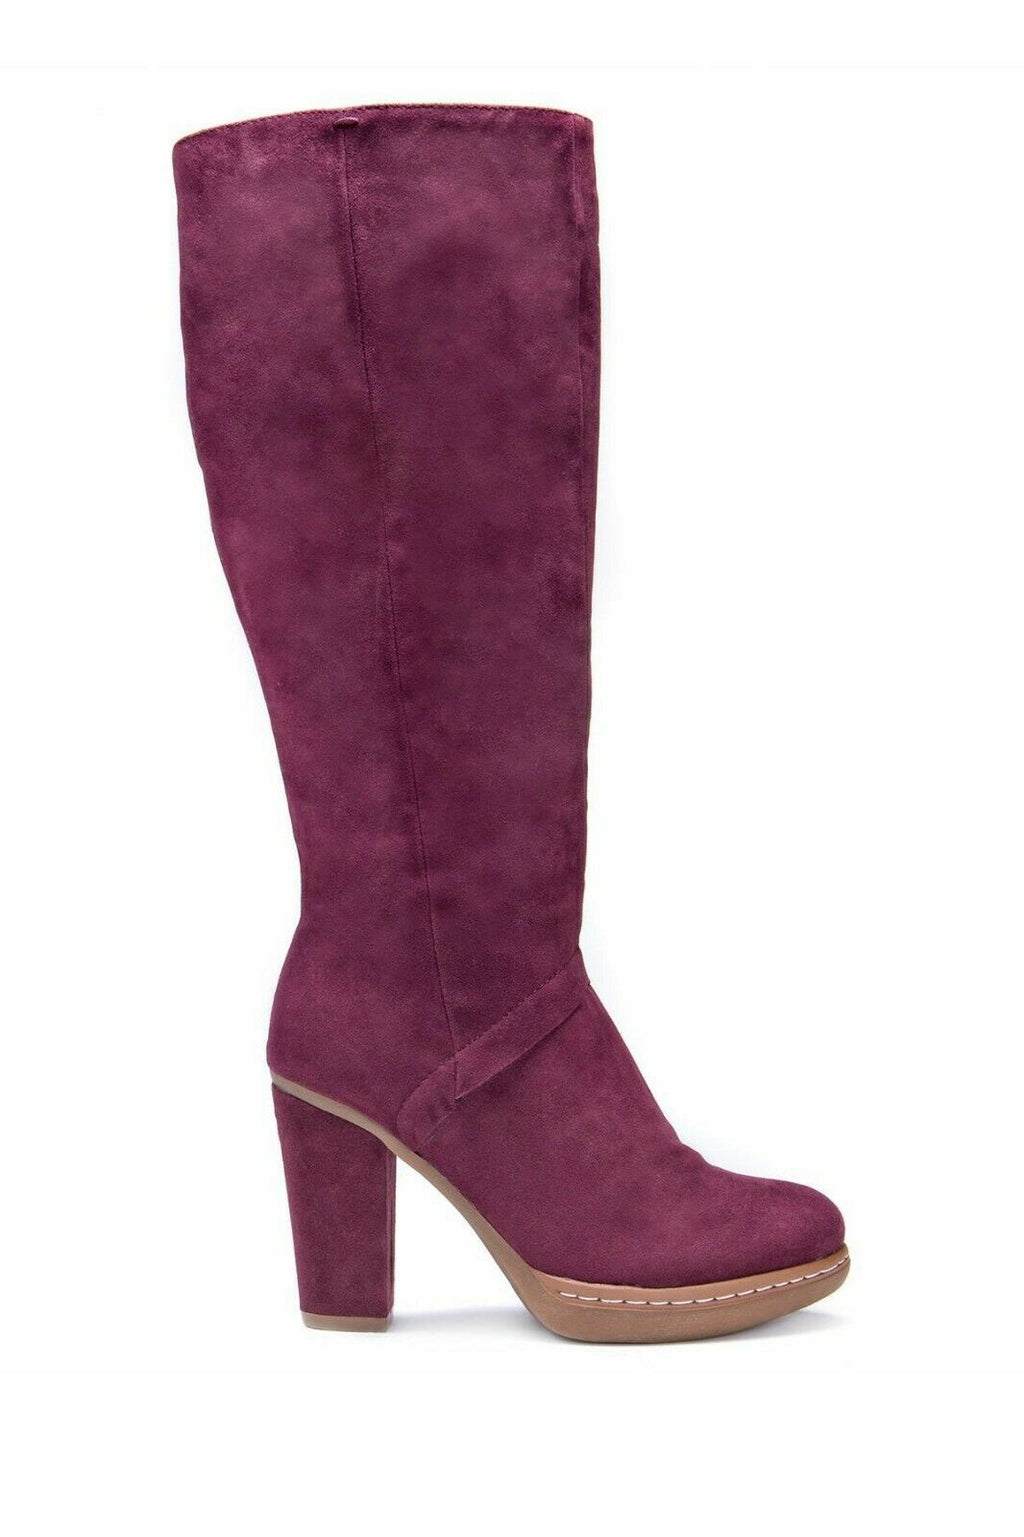 MUK LUKS WOMENS NELLIE KNEE HIGH BOOTS MERLOT SUEDED FAUX FUR LINED HEELED sz 7